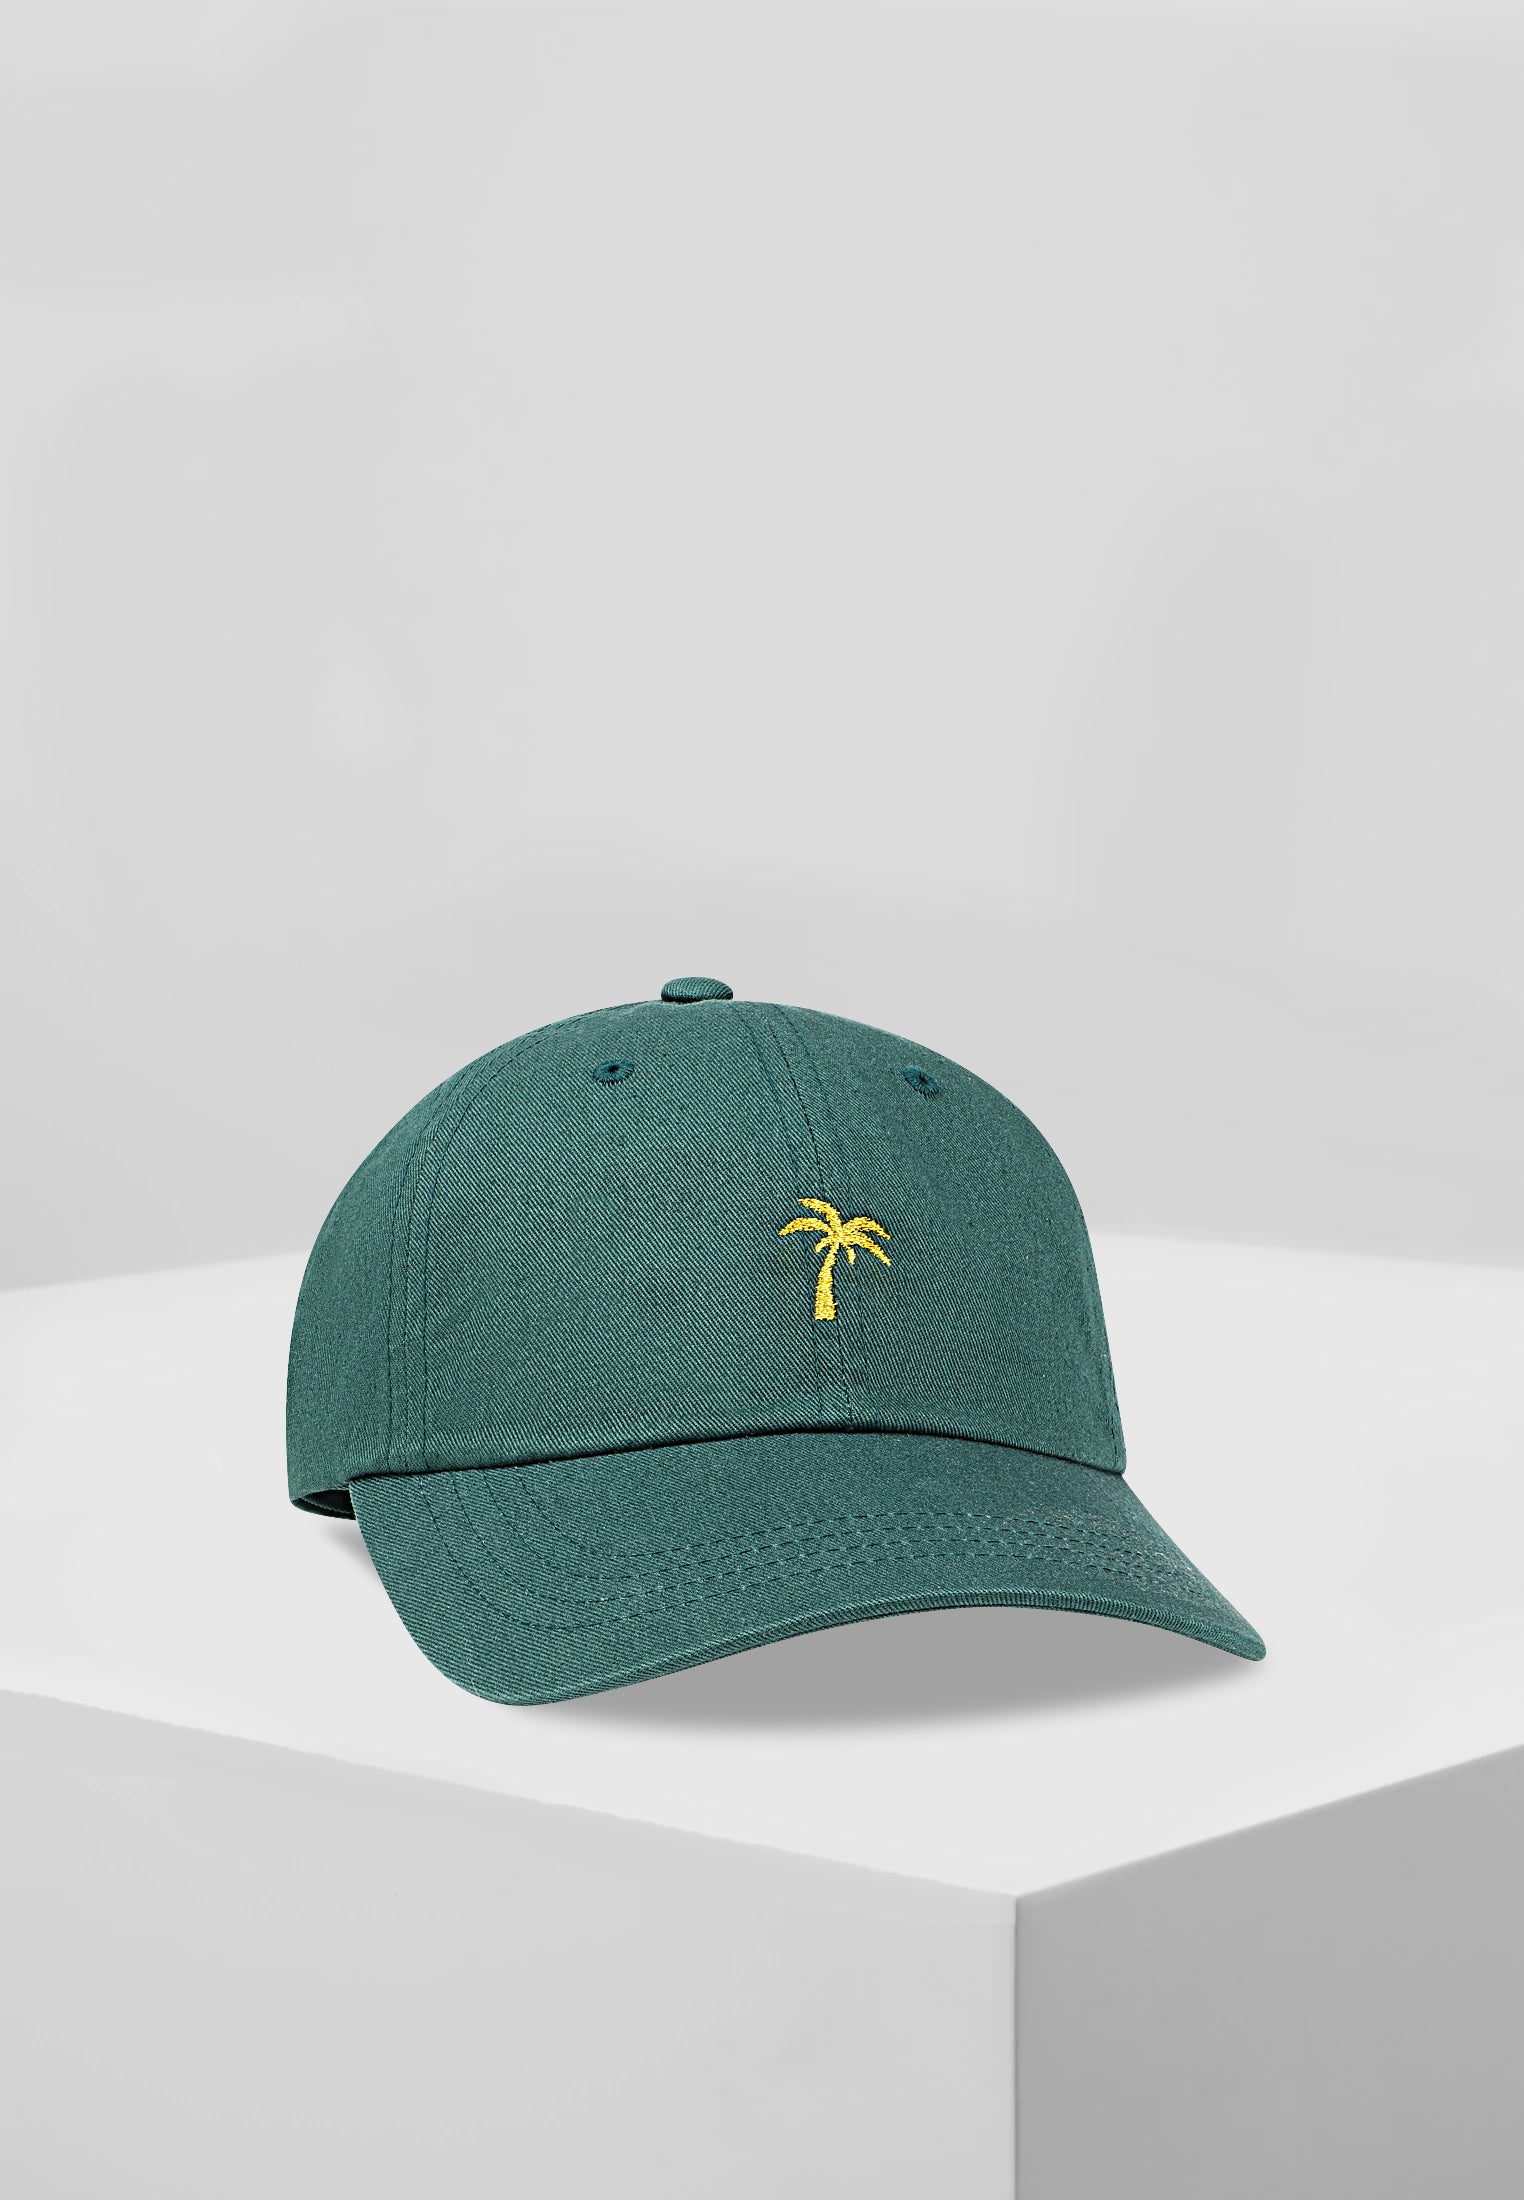 PALM D´OR HAT IN SPRUCE GREEN